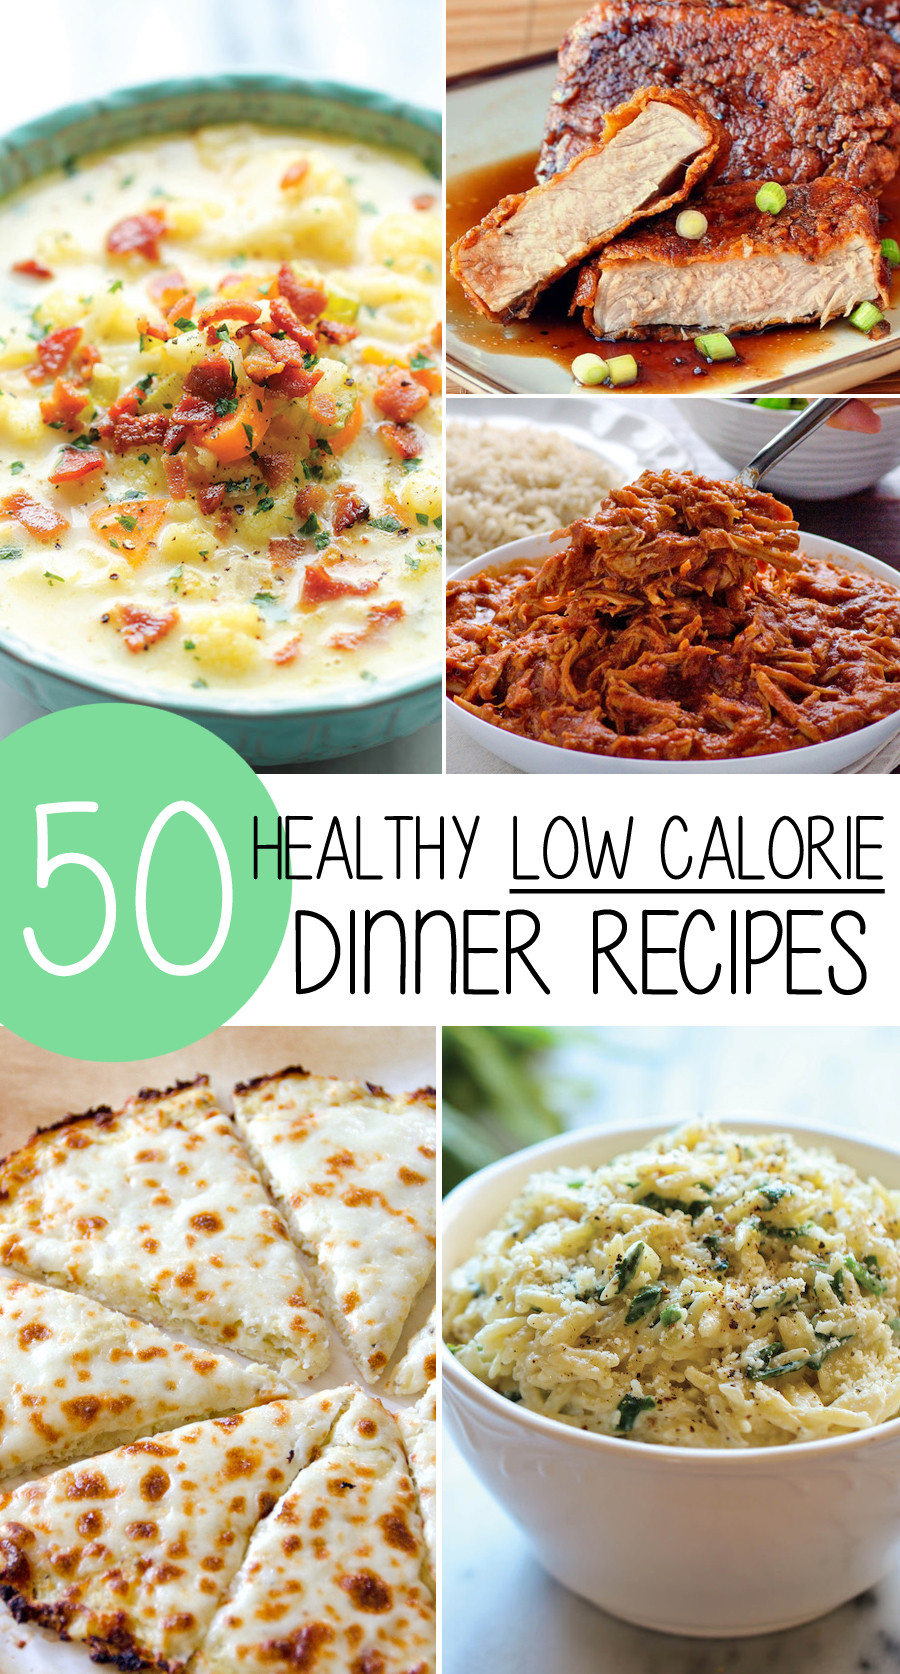 Recipes For Low Calorie Meals
 50 Healthy Low Calorie Weight Loss Dinner Recipes